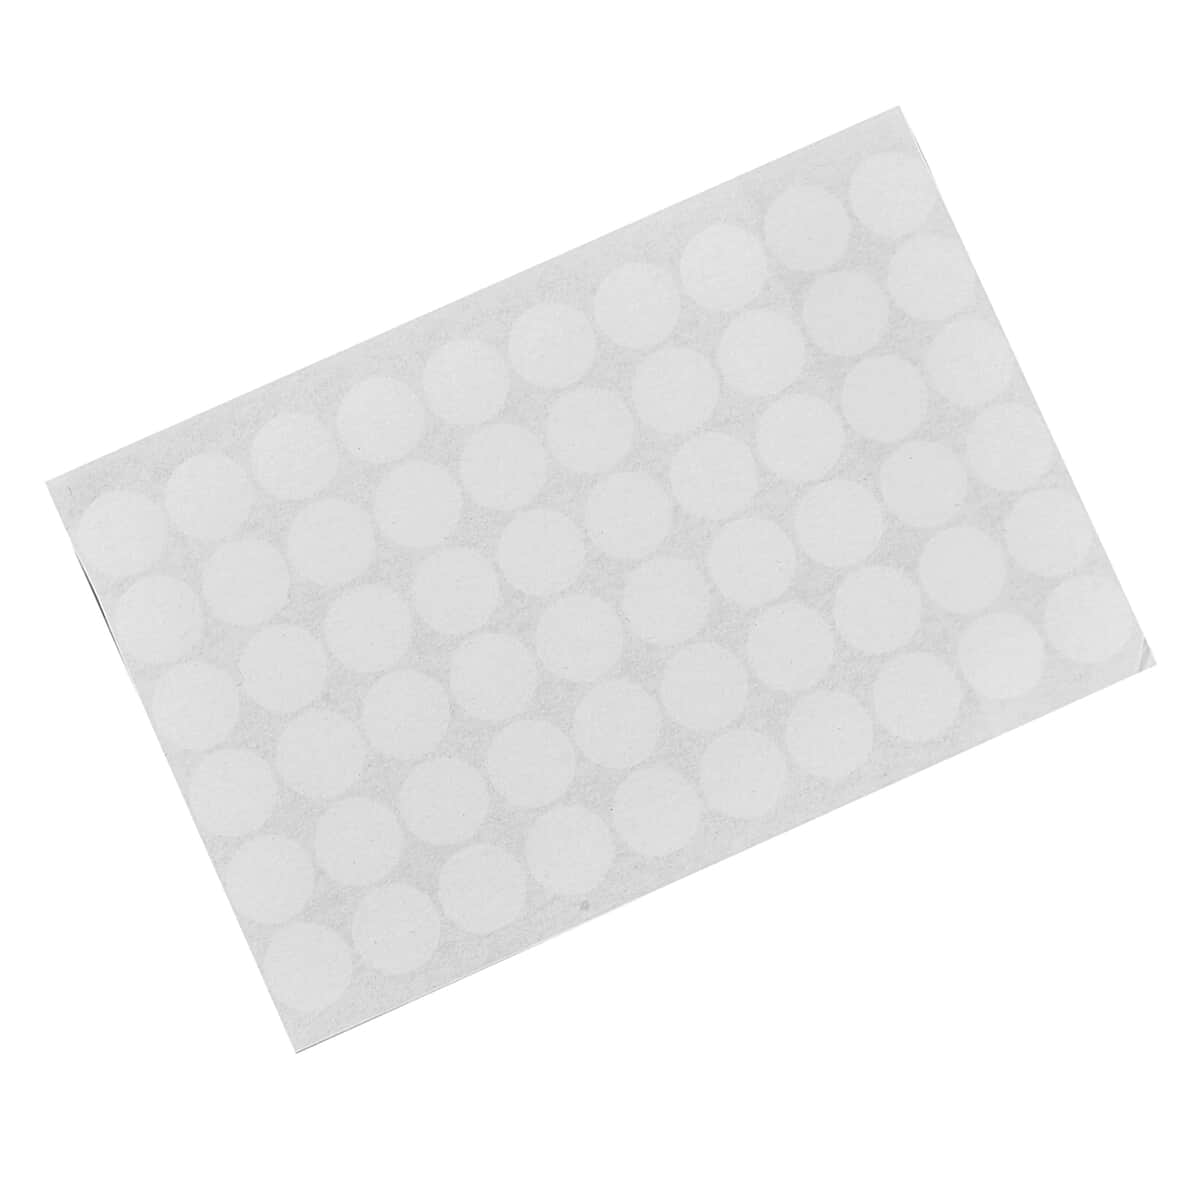 White Acrylic 840pcs Round Double Side Removable Sticker (0.73") image number 6